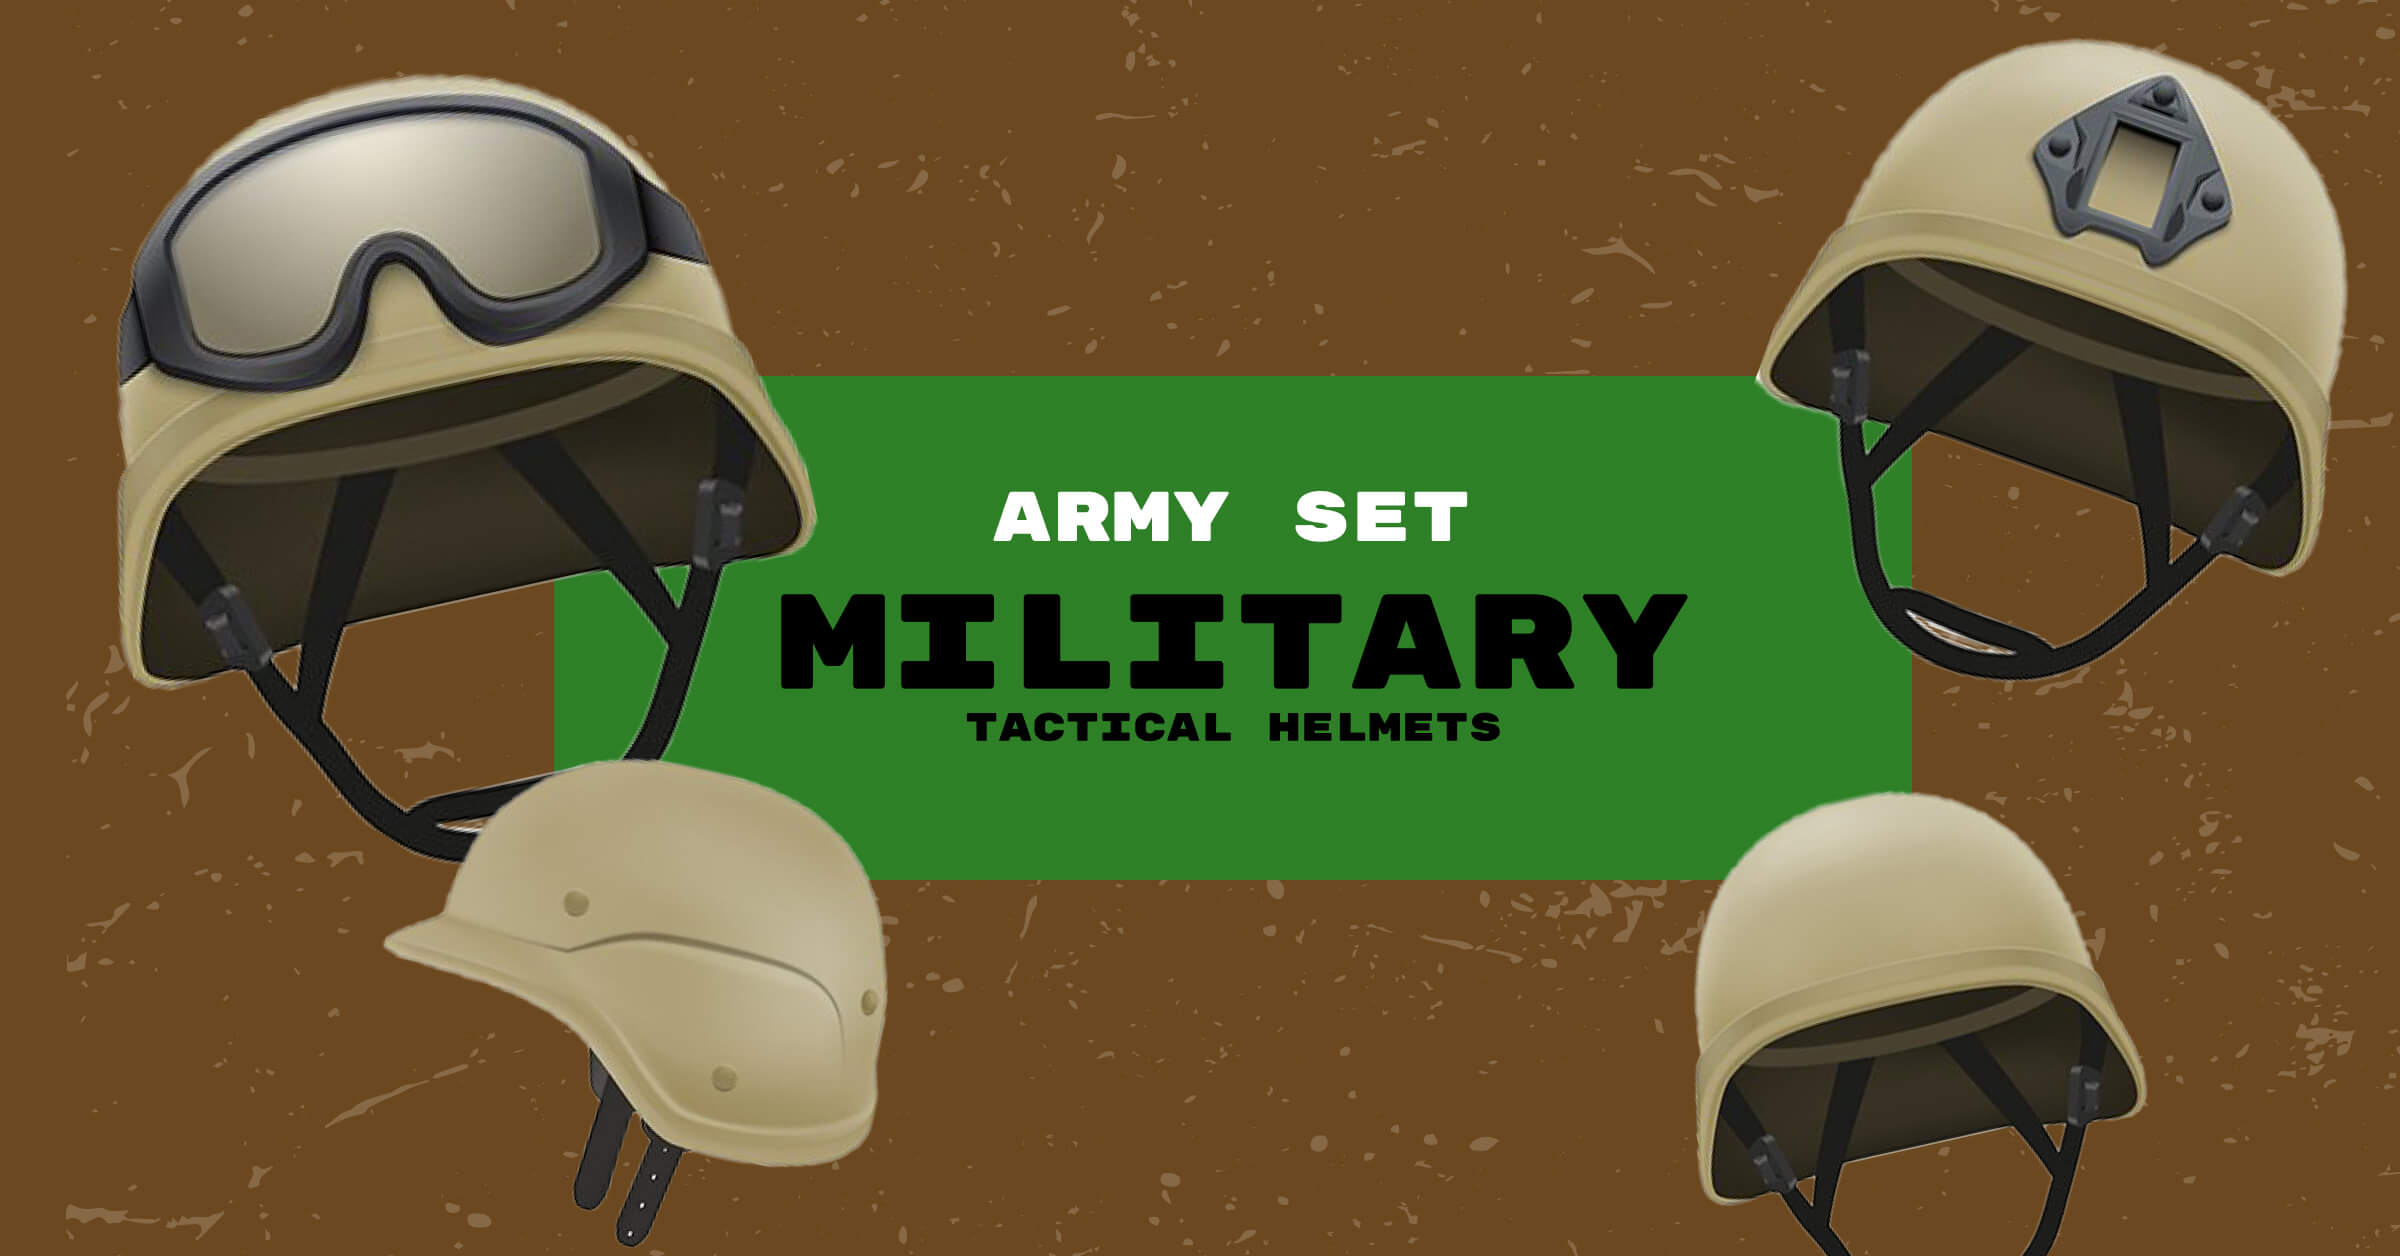 Military helmets on a brown background.